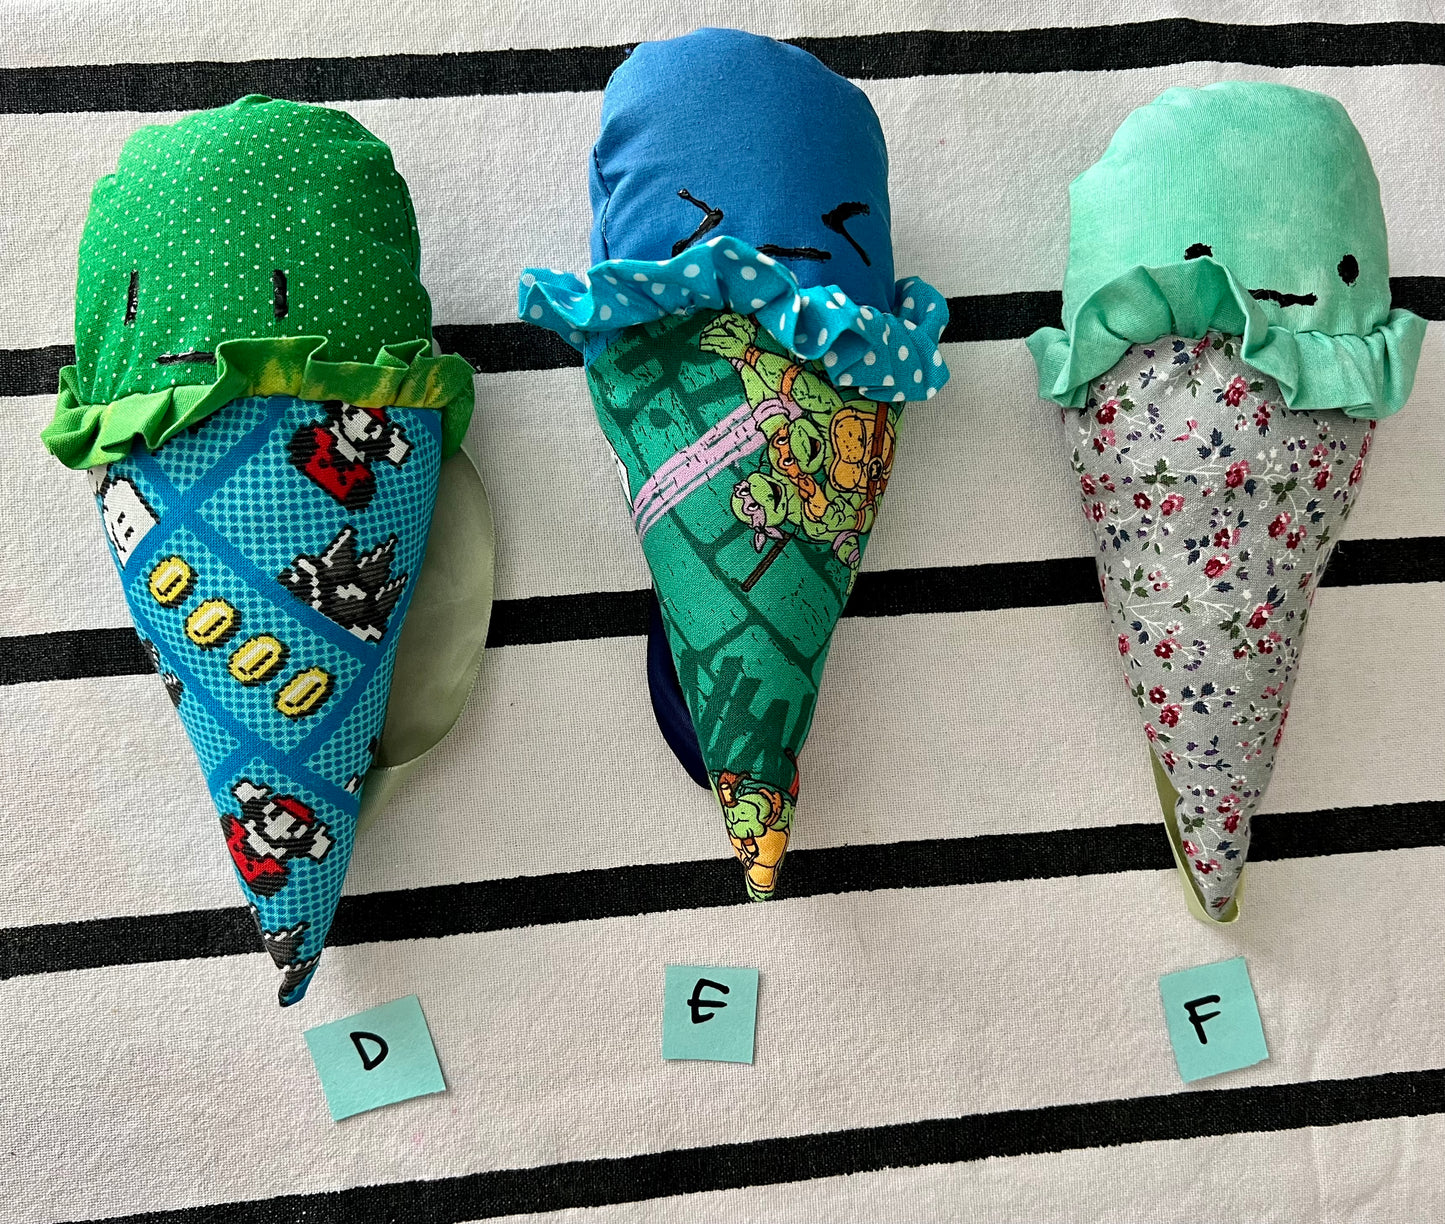 Ice cream cone plushies with handpainted faces, lined up with the letters D E F below them